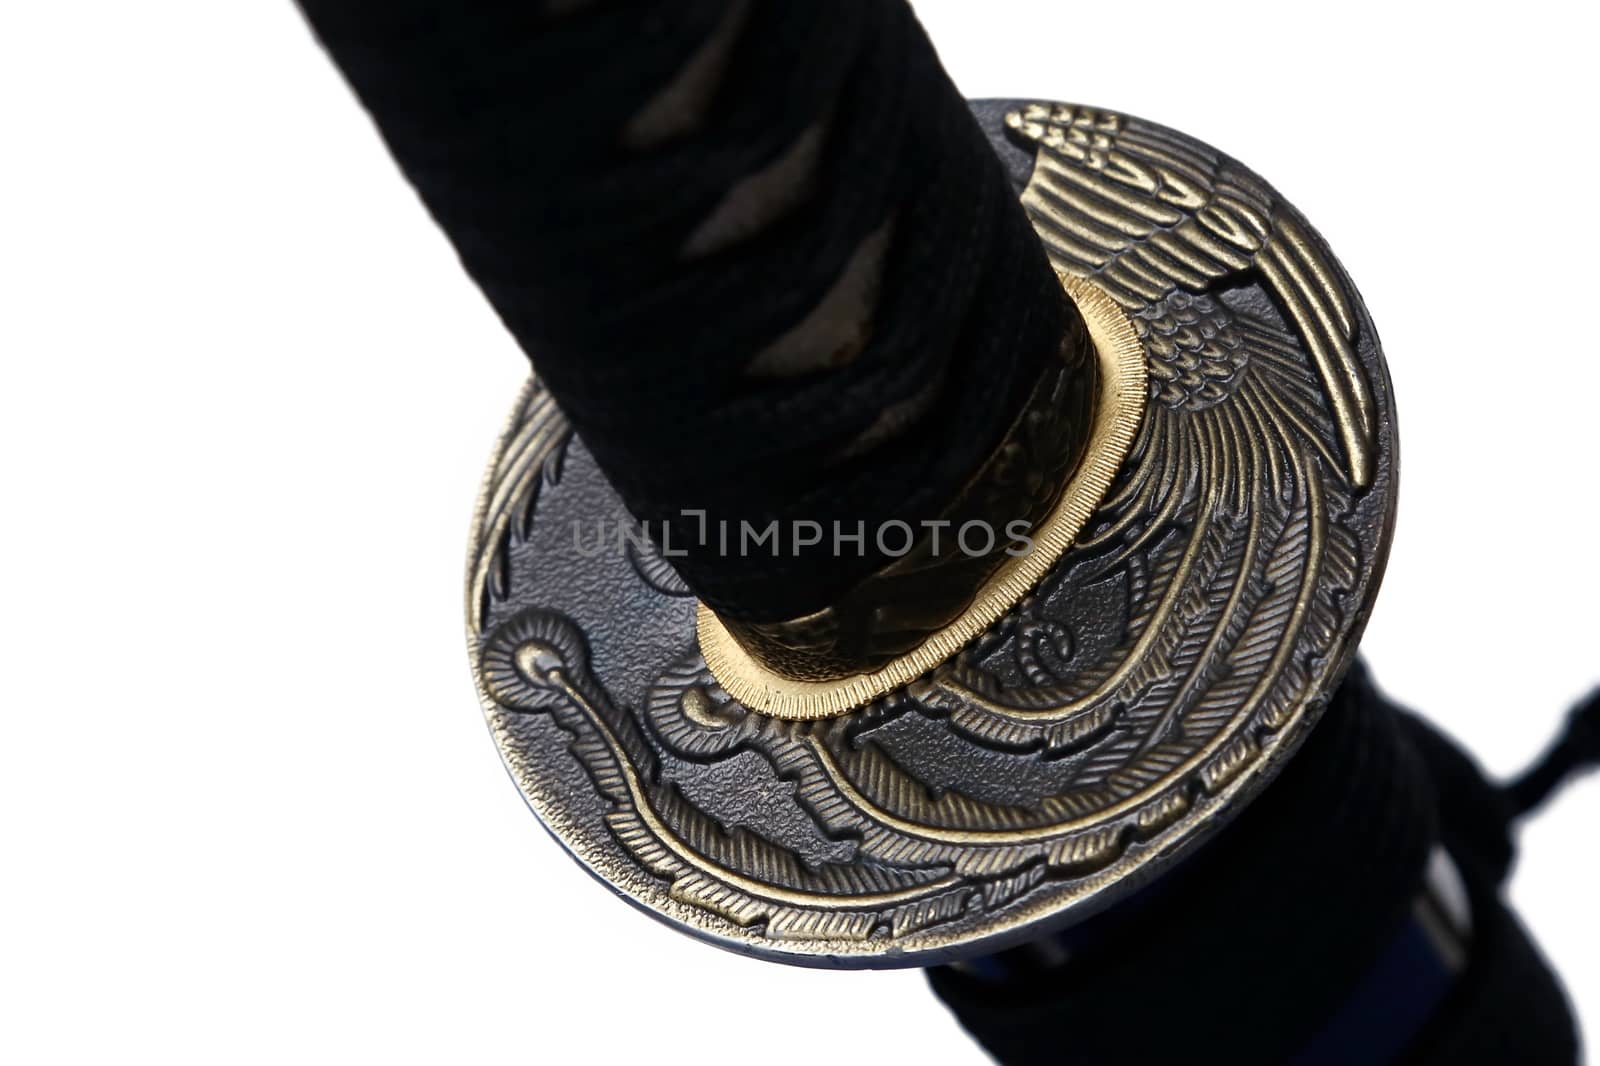 Tsuba : hand guard of Japanese sword with white background